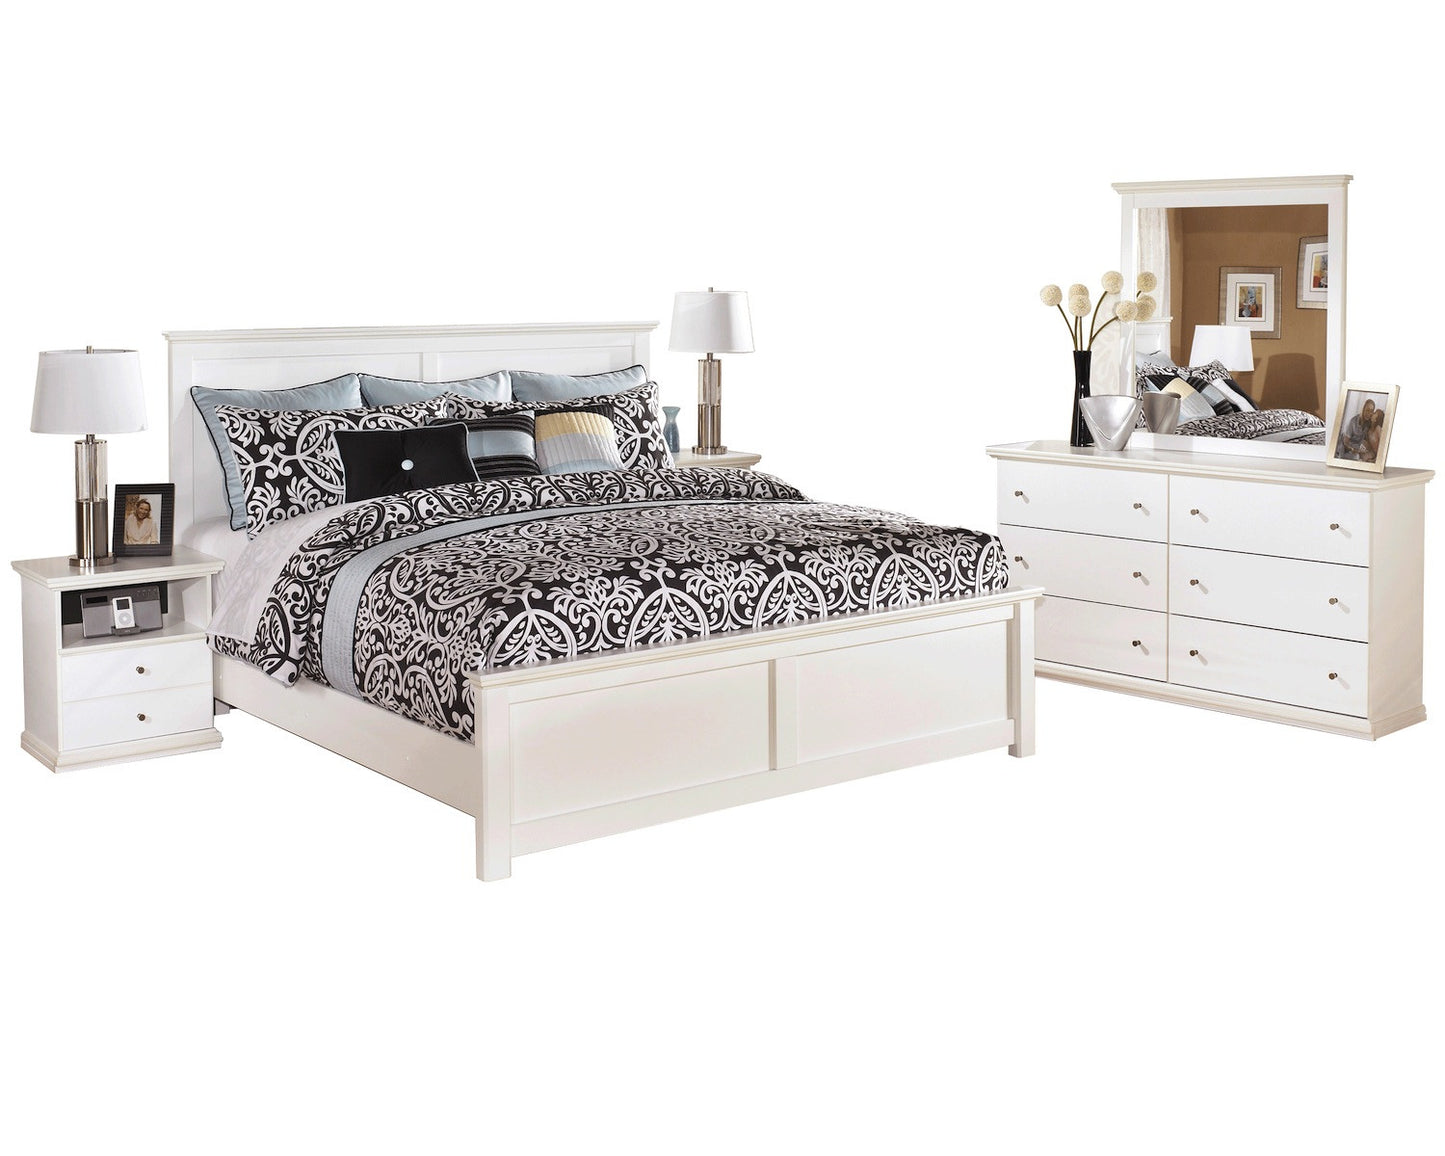 Ashley Bostwick Shoals 5 PC E King Panel Headboard Bedroom Set with two Nightstands in White